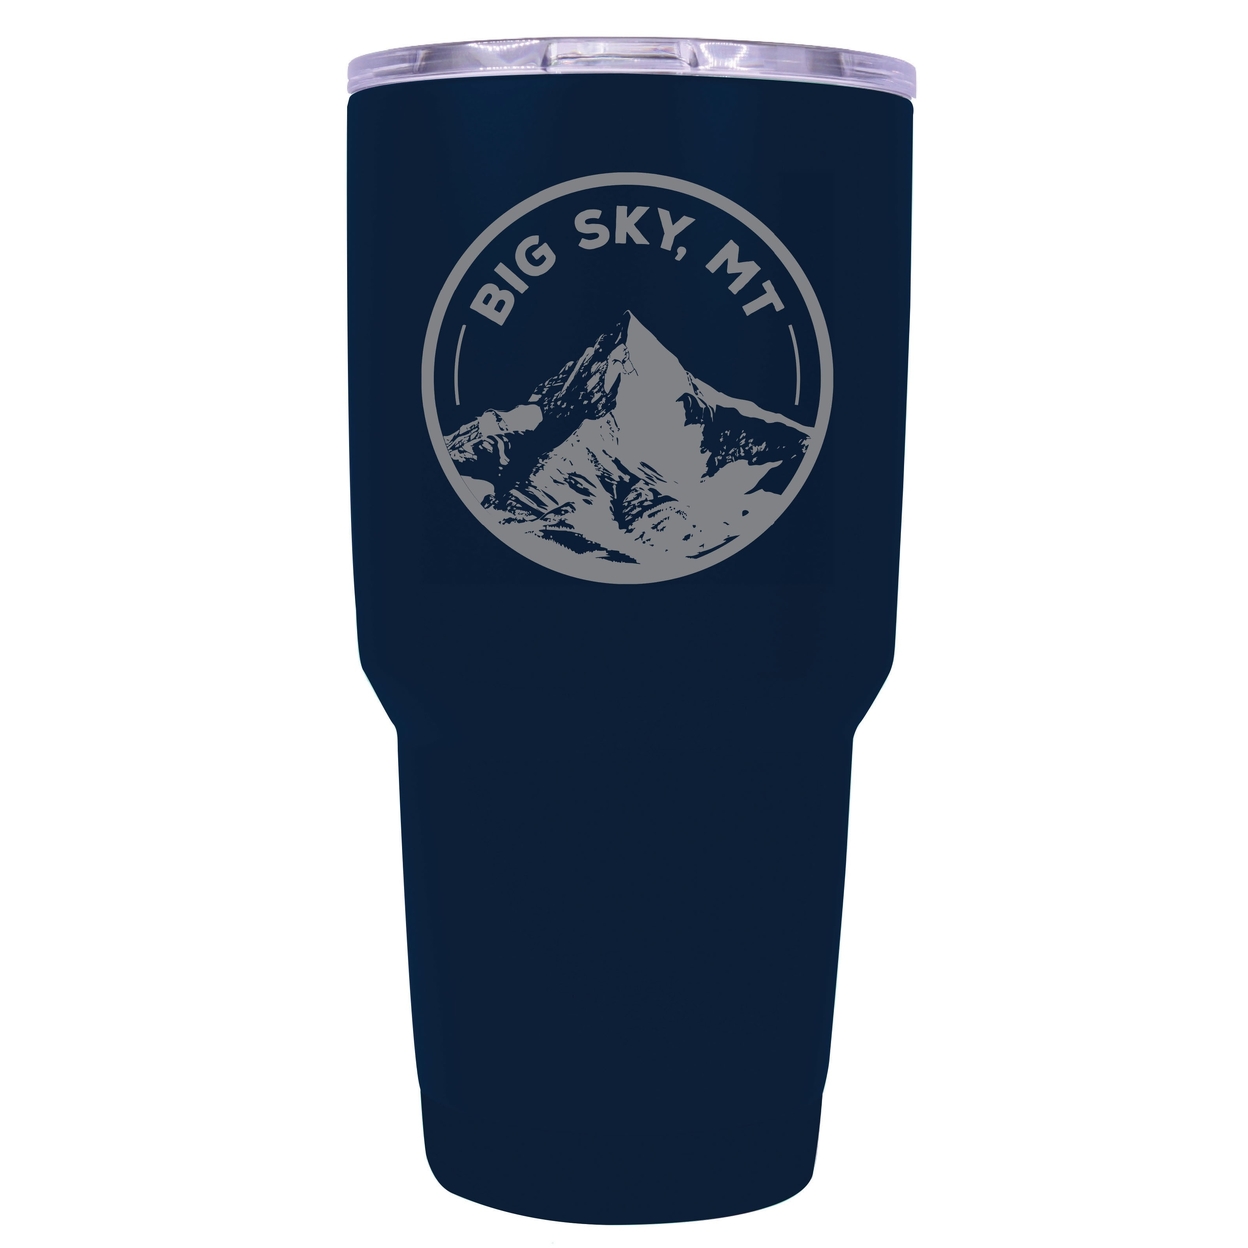 Big Sky Montana Souvenir 24 Oz Engraved Insulated Stainless Steel Tumbler - Navy,,4-Pack